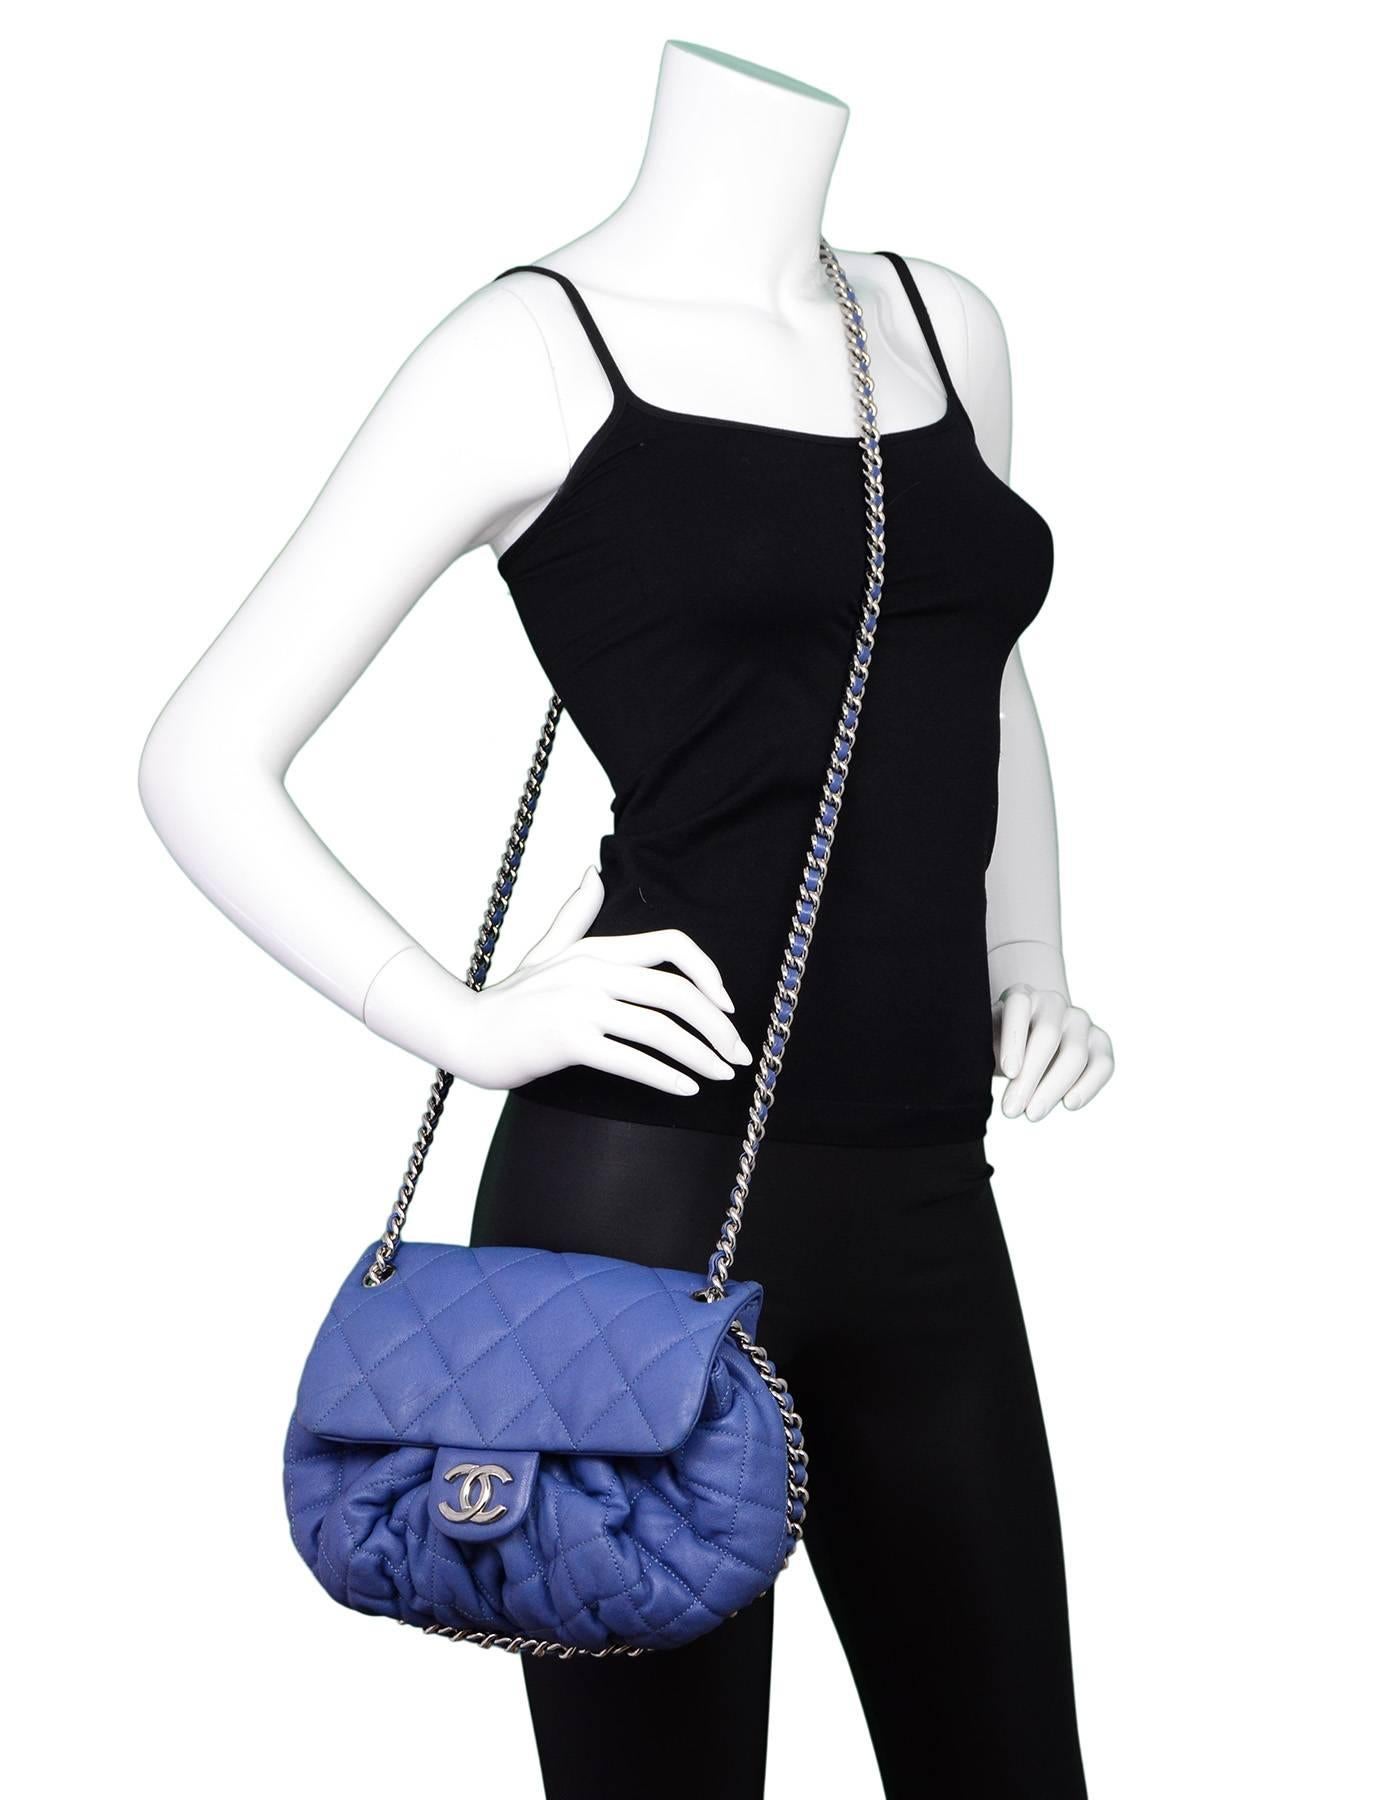 Chanel Blue Washed Lambskin Medium Chain Around Crossbody

Made In: Italy
Year of Production: 2011
Color: Blue
Hardware: Silvertone
Materials: Washed lambskin leather, metal
Lining: Cream textile
Closure/Opening: Flap top with magnetic snap